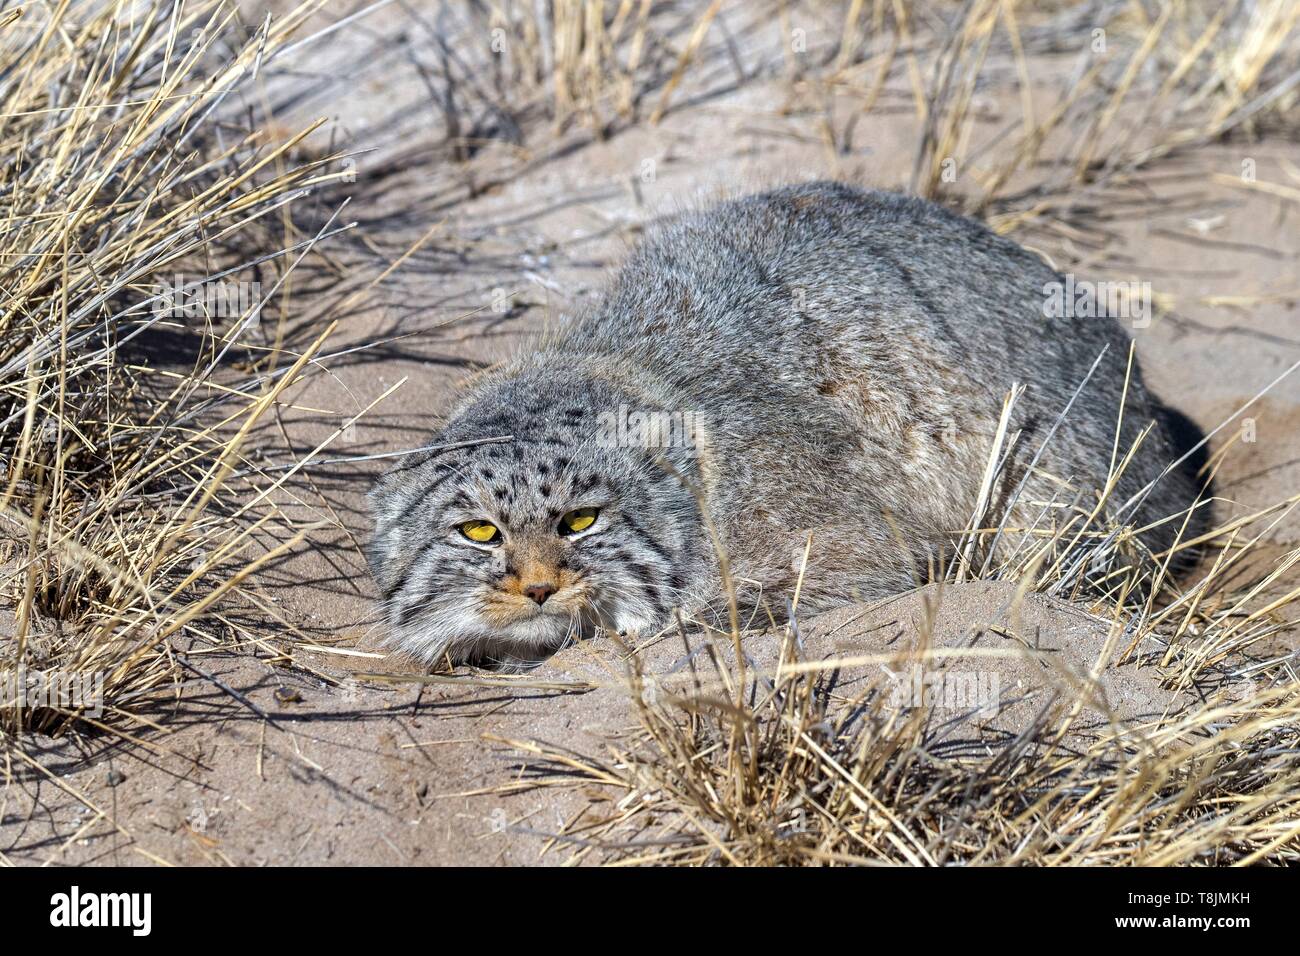 Mongolia, East Mongolia, Steppe area, Pallas's cat (Otocolobus manul), in the grass Stock Photo